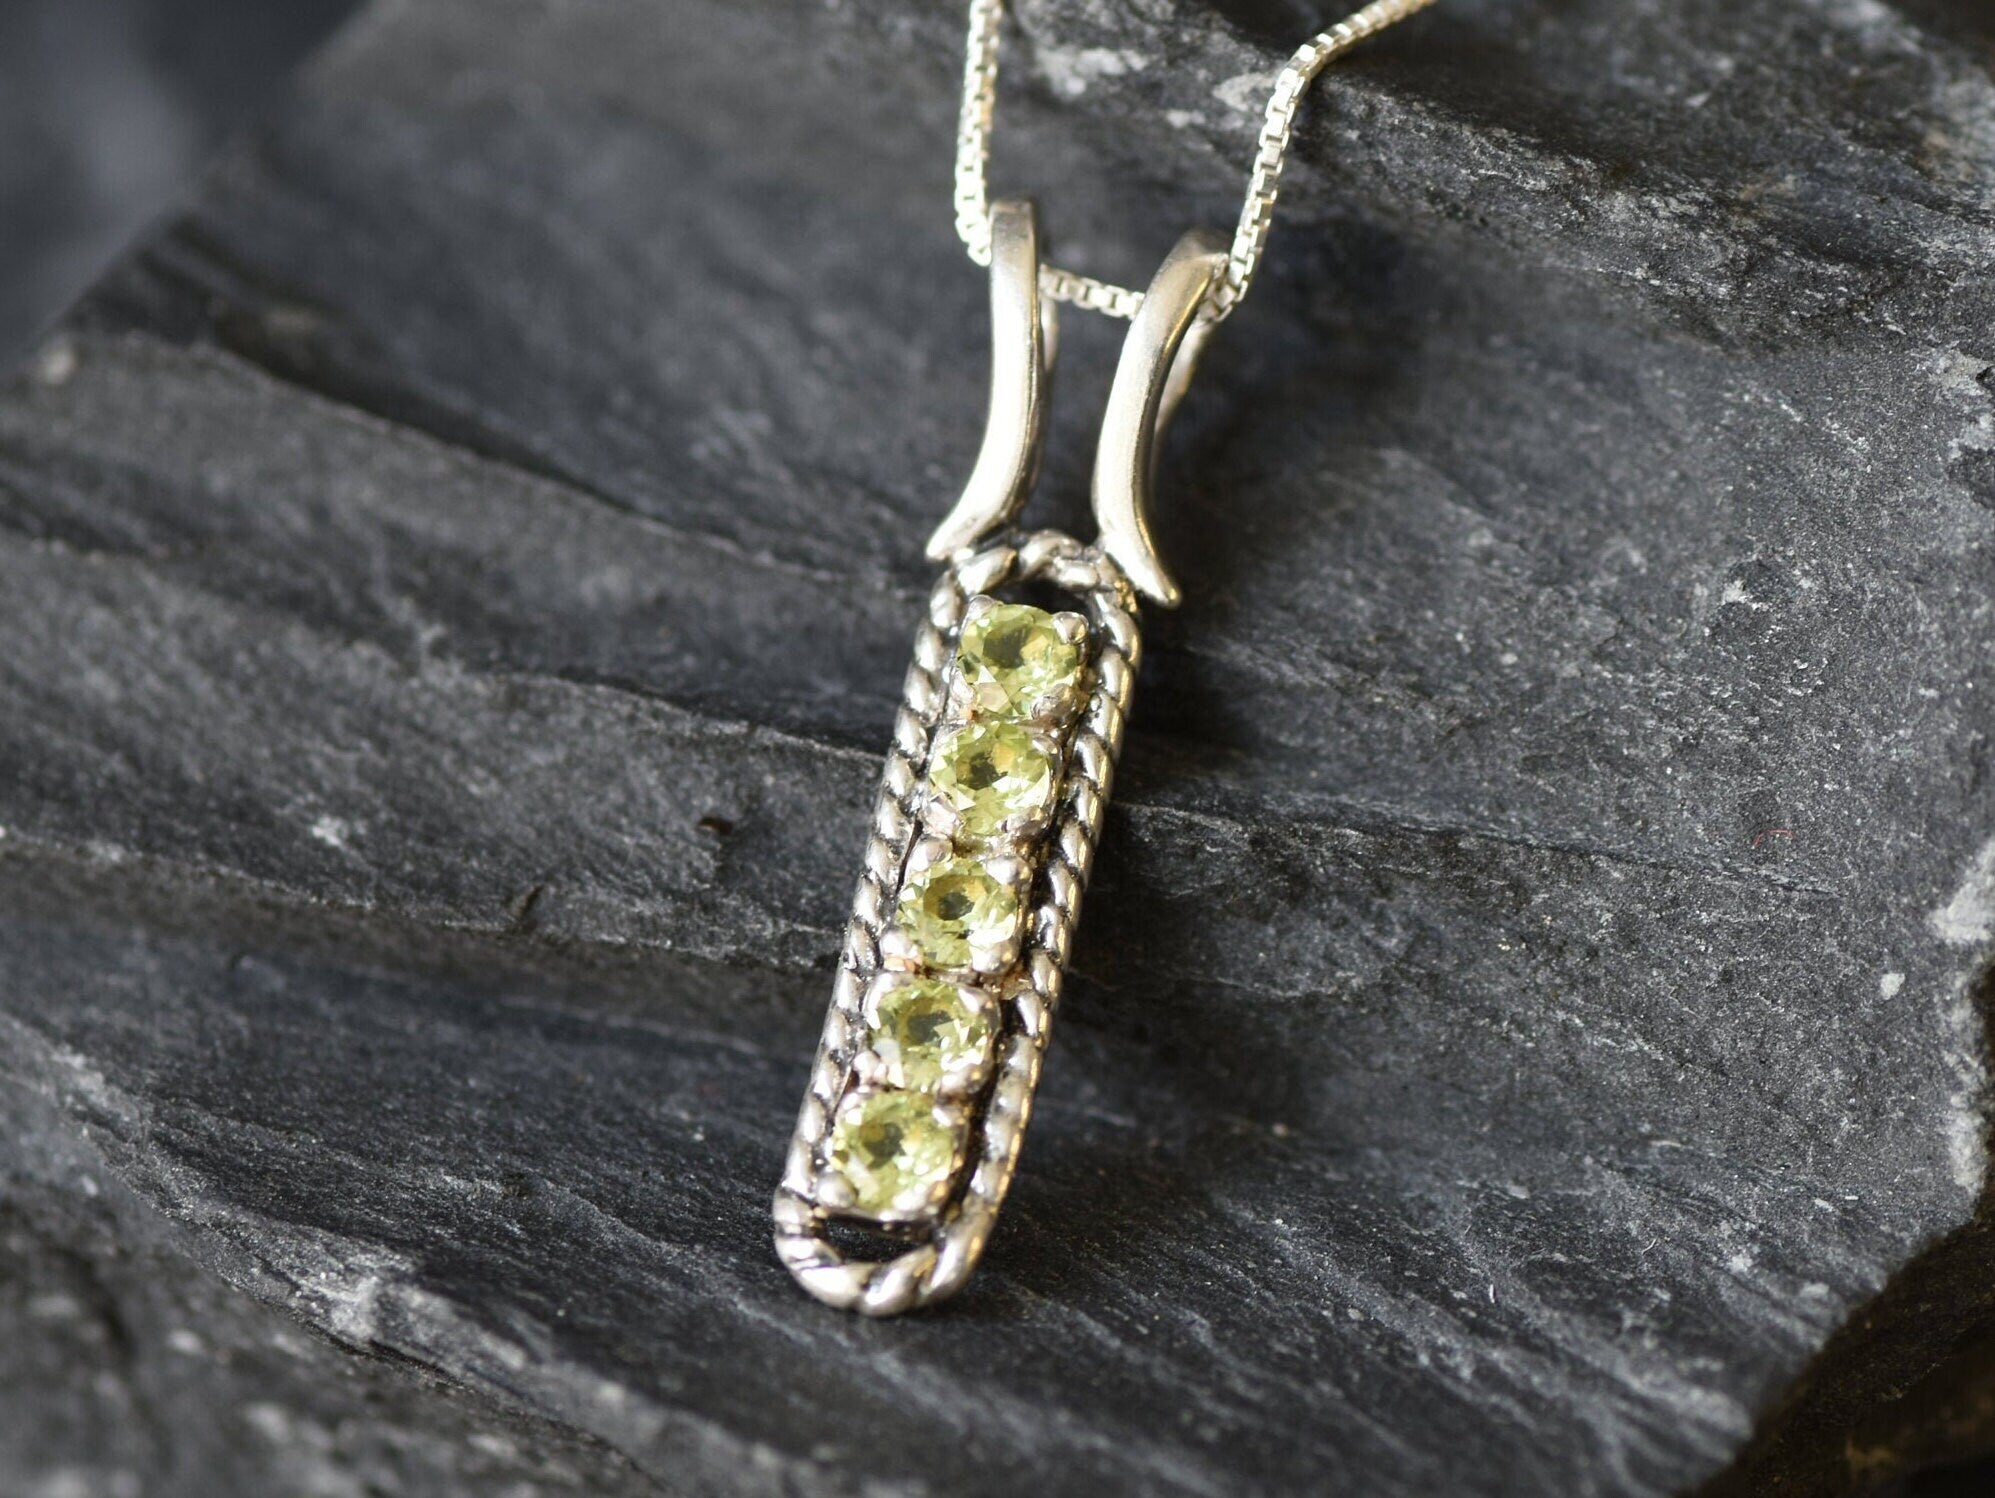 Peridot Pendant, Natural Peridot, August Birthstone, Victorian Pendant, Vintage Pendant, Layering Necklace, Peridot Necklace, Solid Silver